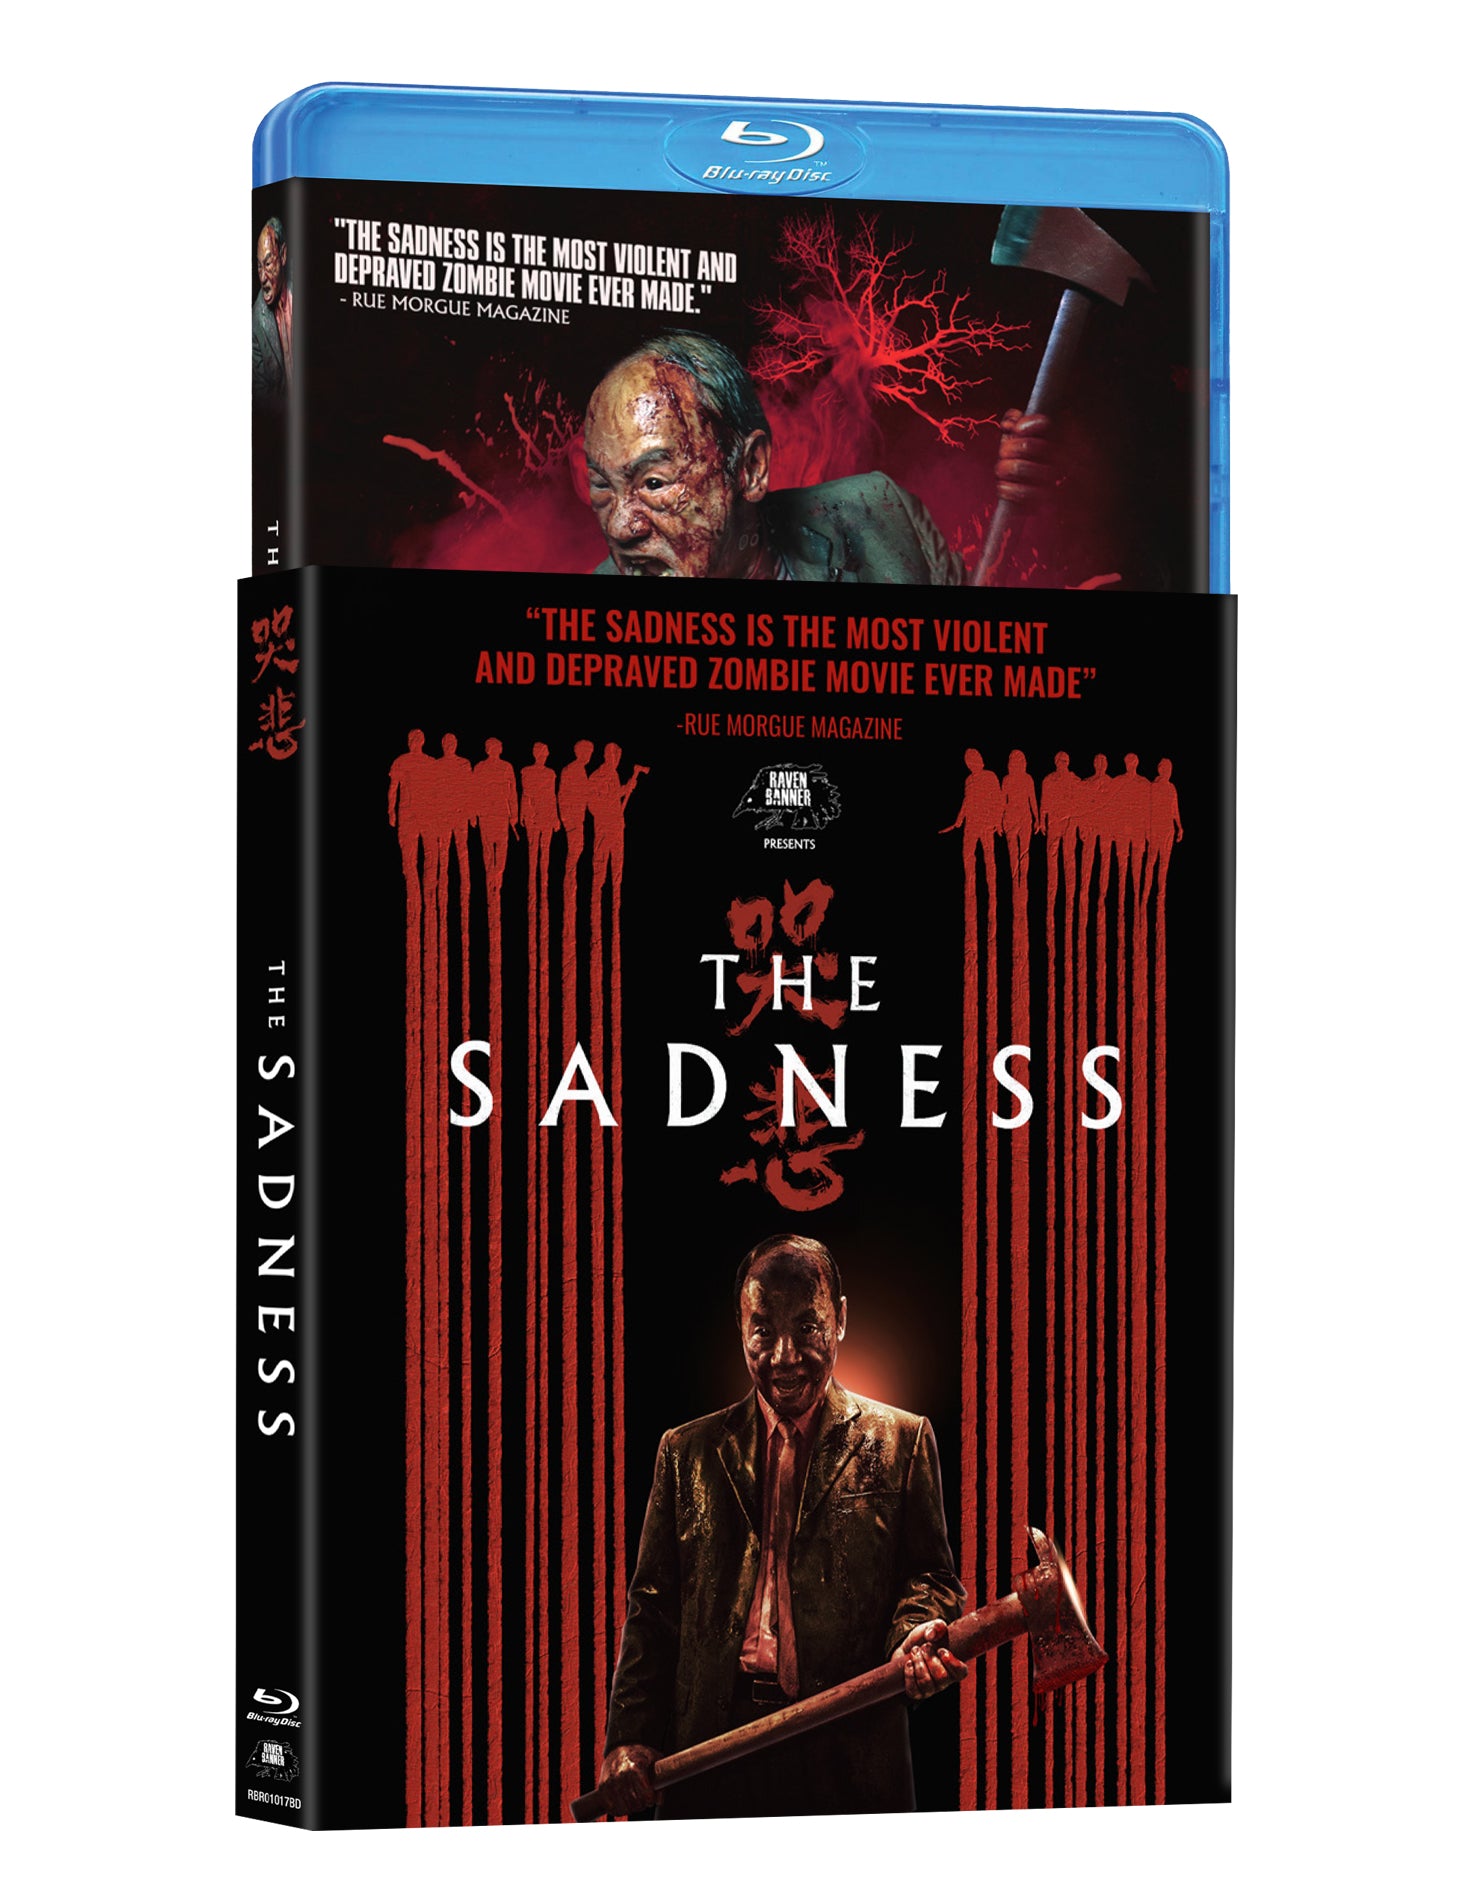 THE SADNESS - SPECIAL DIRECTOR'S EDITION BLU-RAY